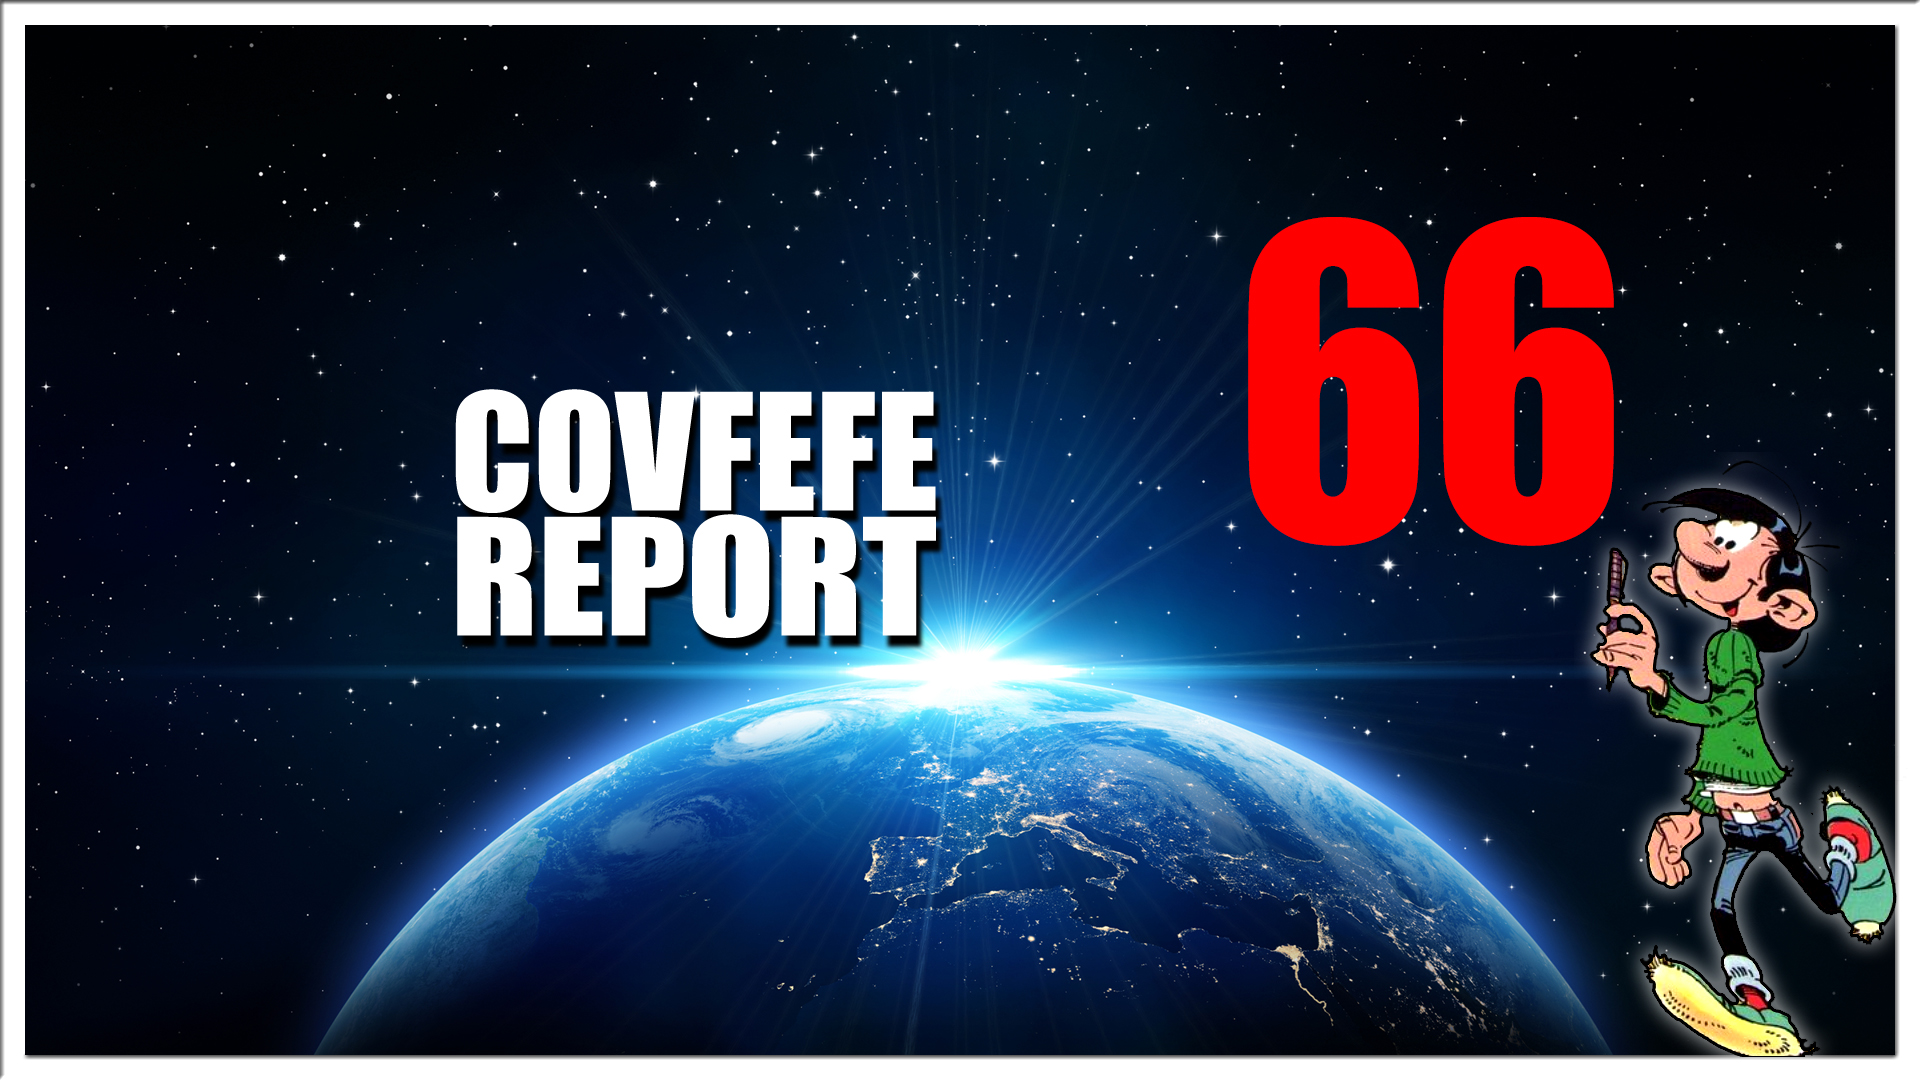 Covfefe Report 66. Qpost, Taalwoord, Qnl discord, Something BIG is coming 2020